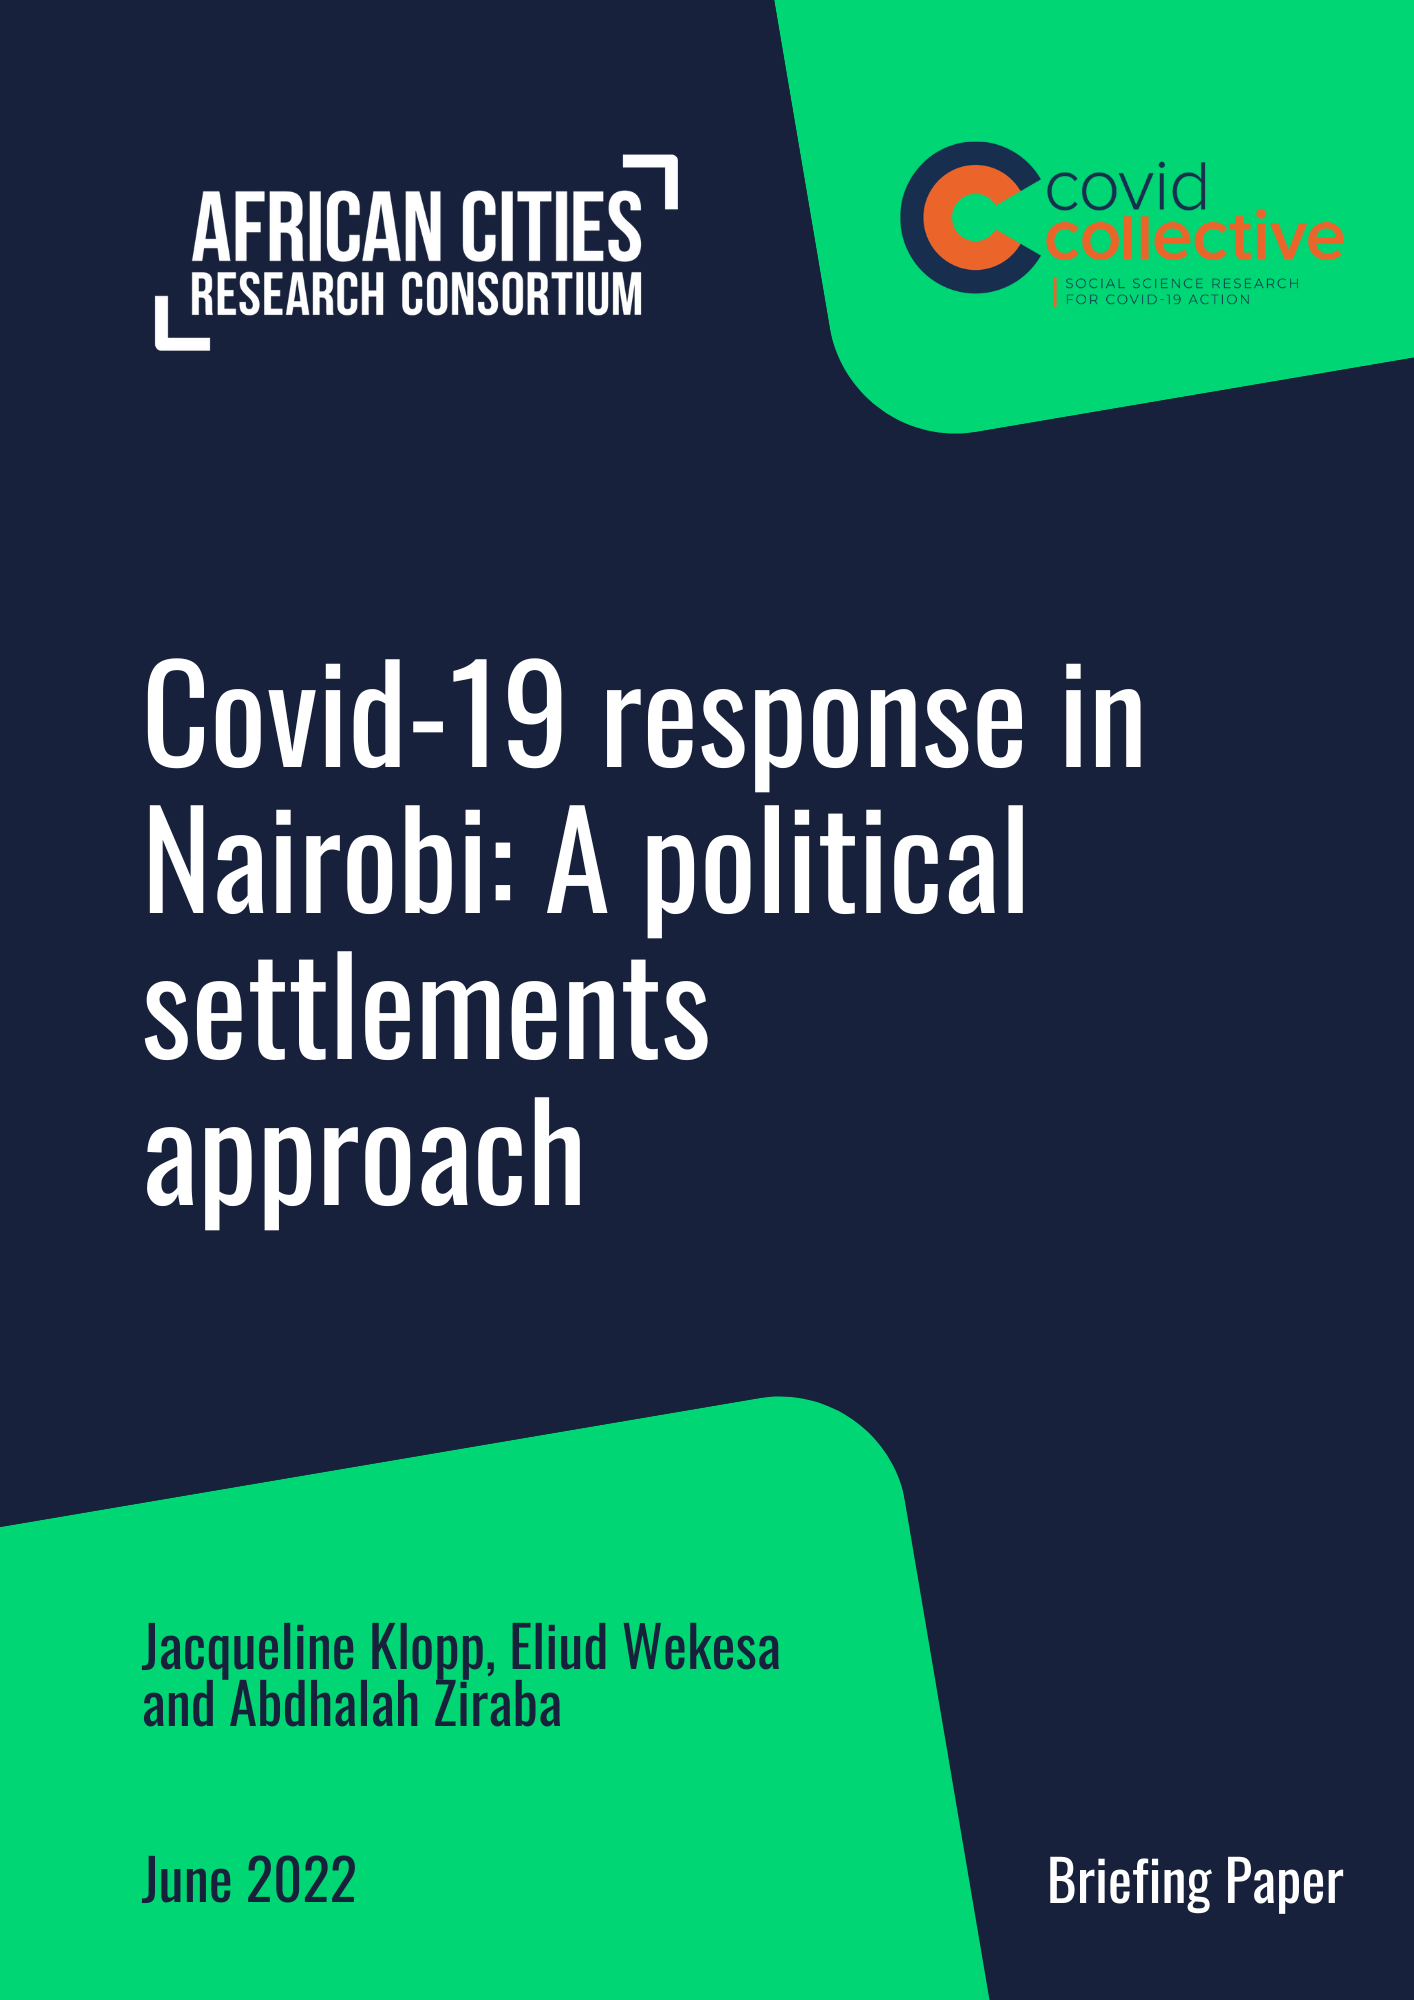 Covid-19 response in Nairobi: A political settlements approach